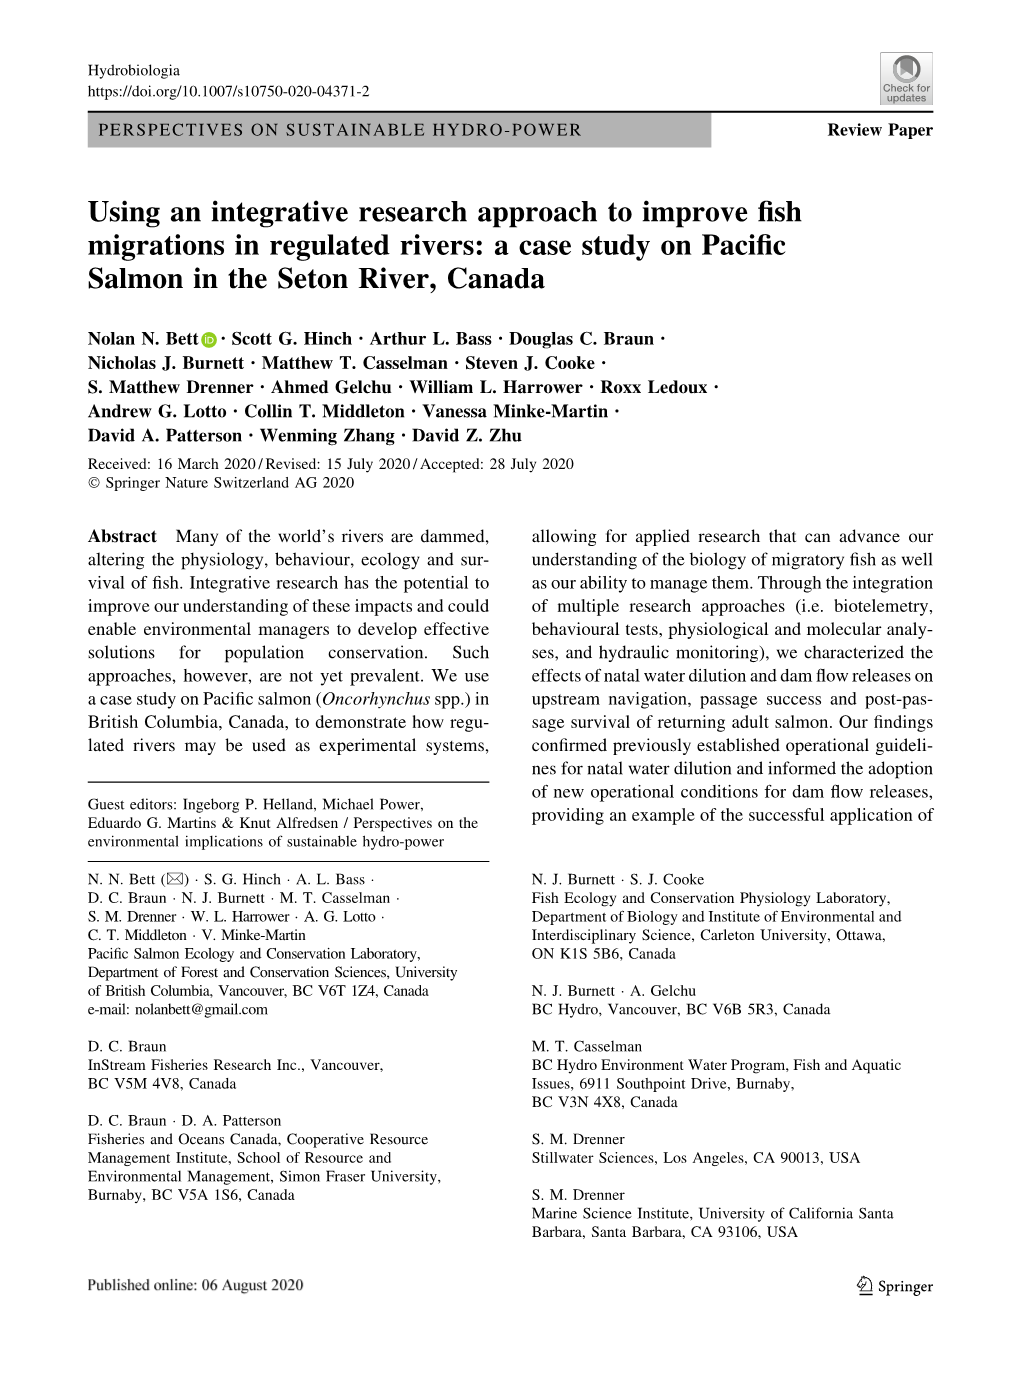 Using an Integrative Research Approach to Improve Fish Migrations in Regulated Rivers